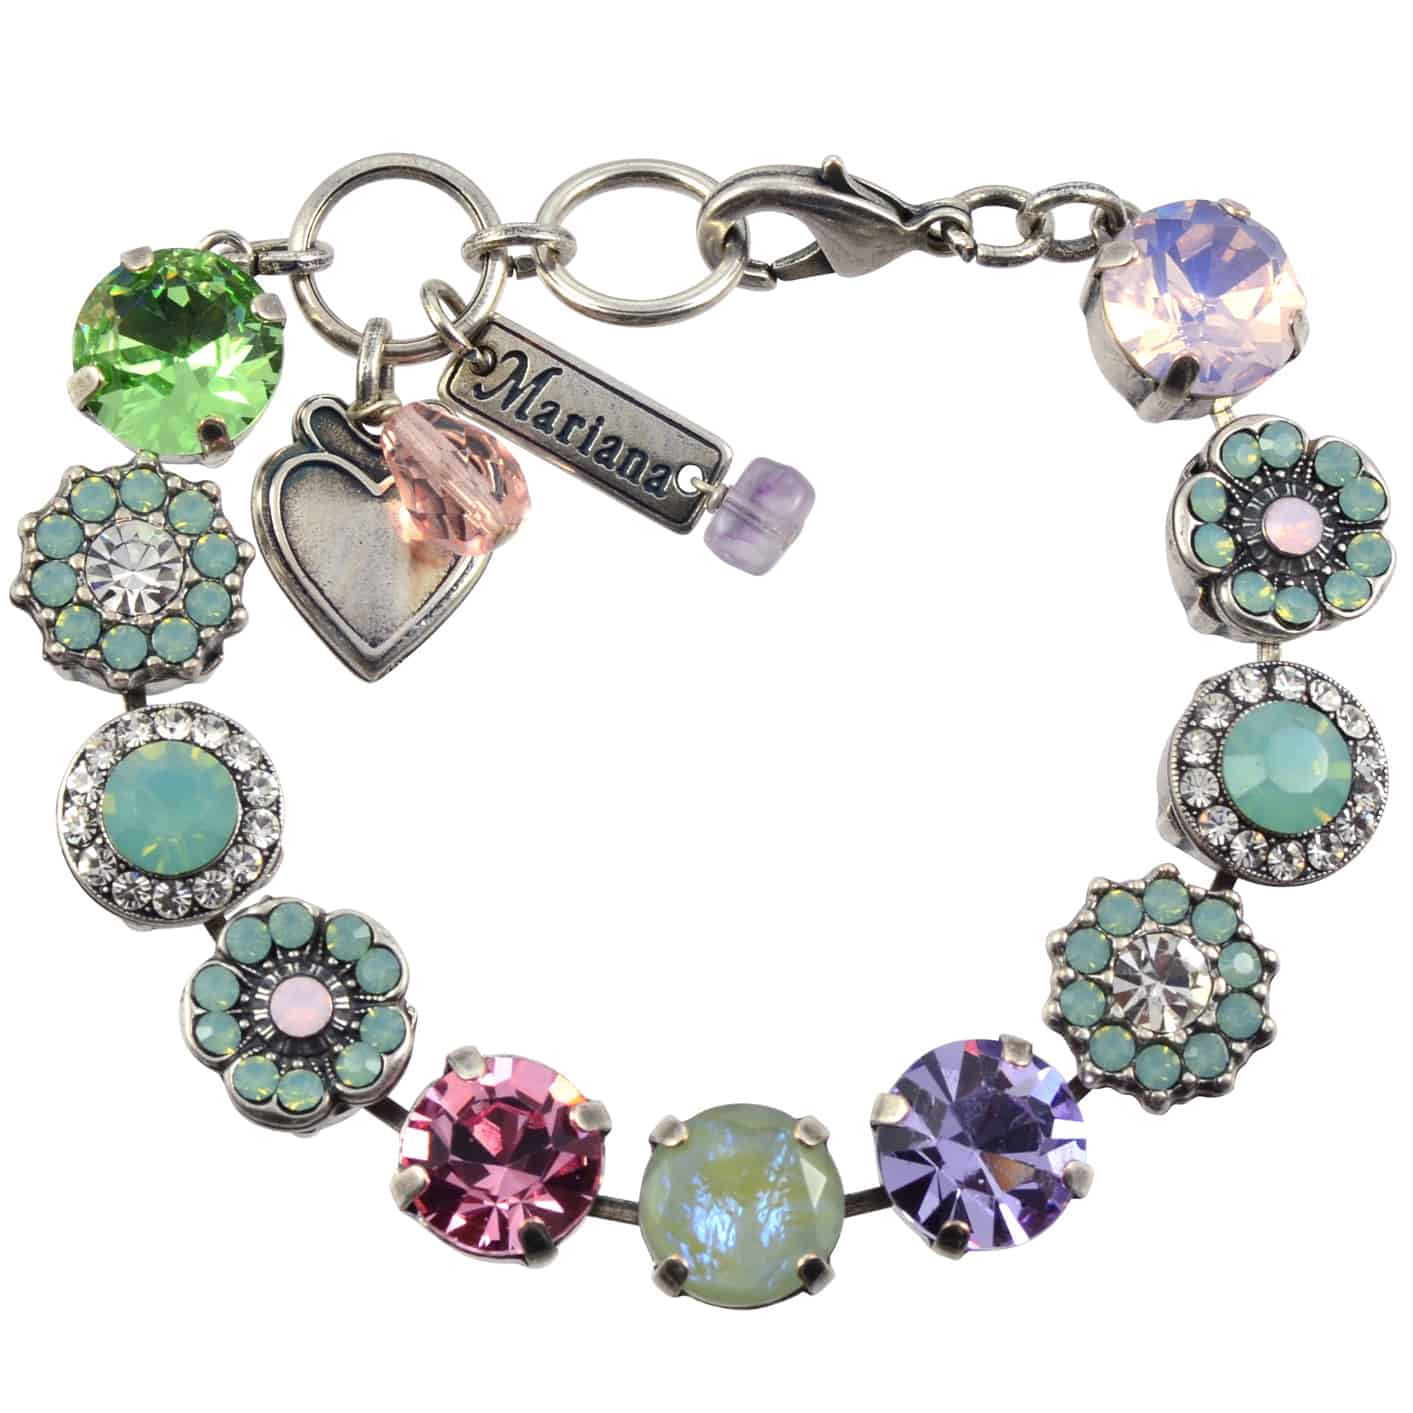 Mariana Jewelry Pina Colada Silver Plated Flower crystal Tennis Bracelet, 8